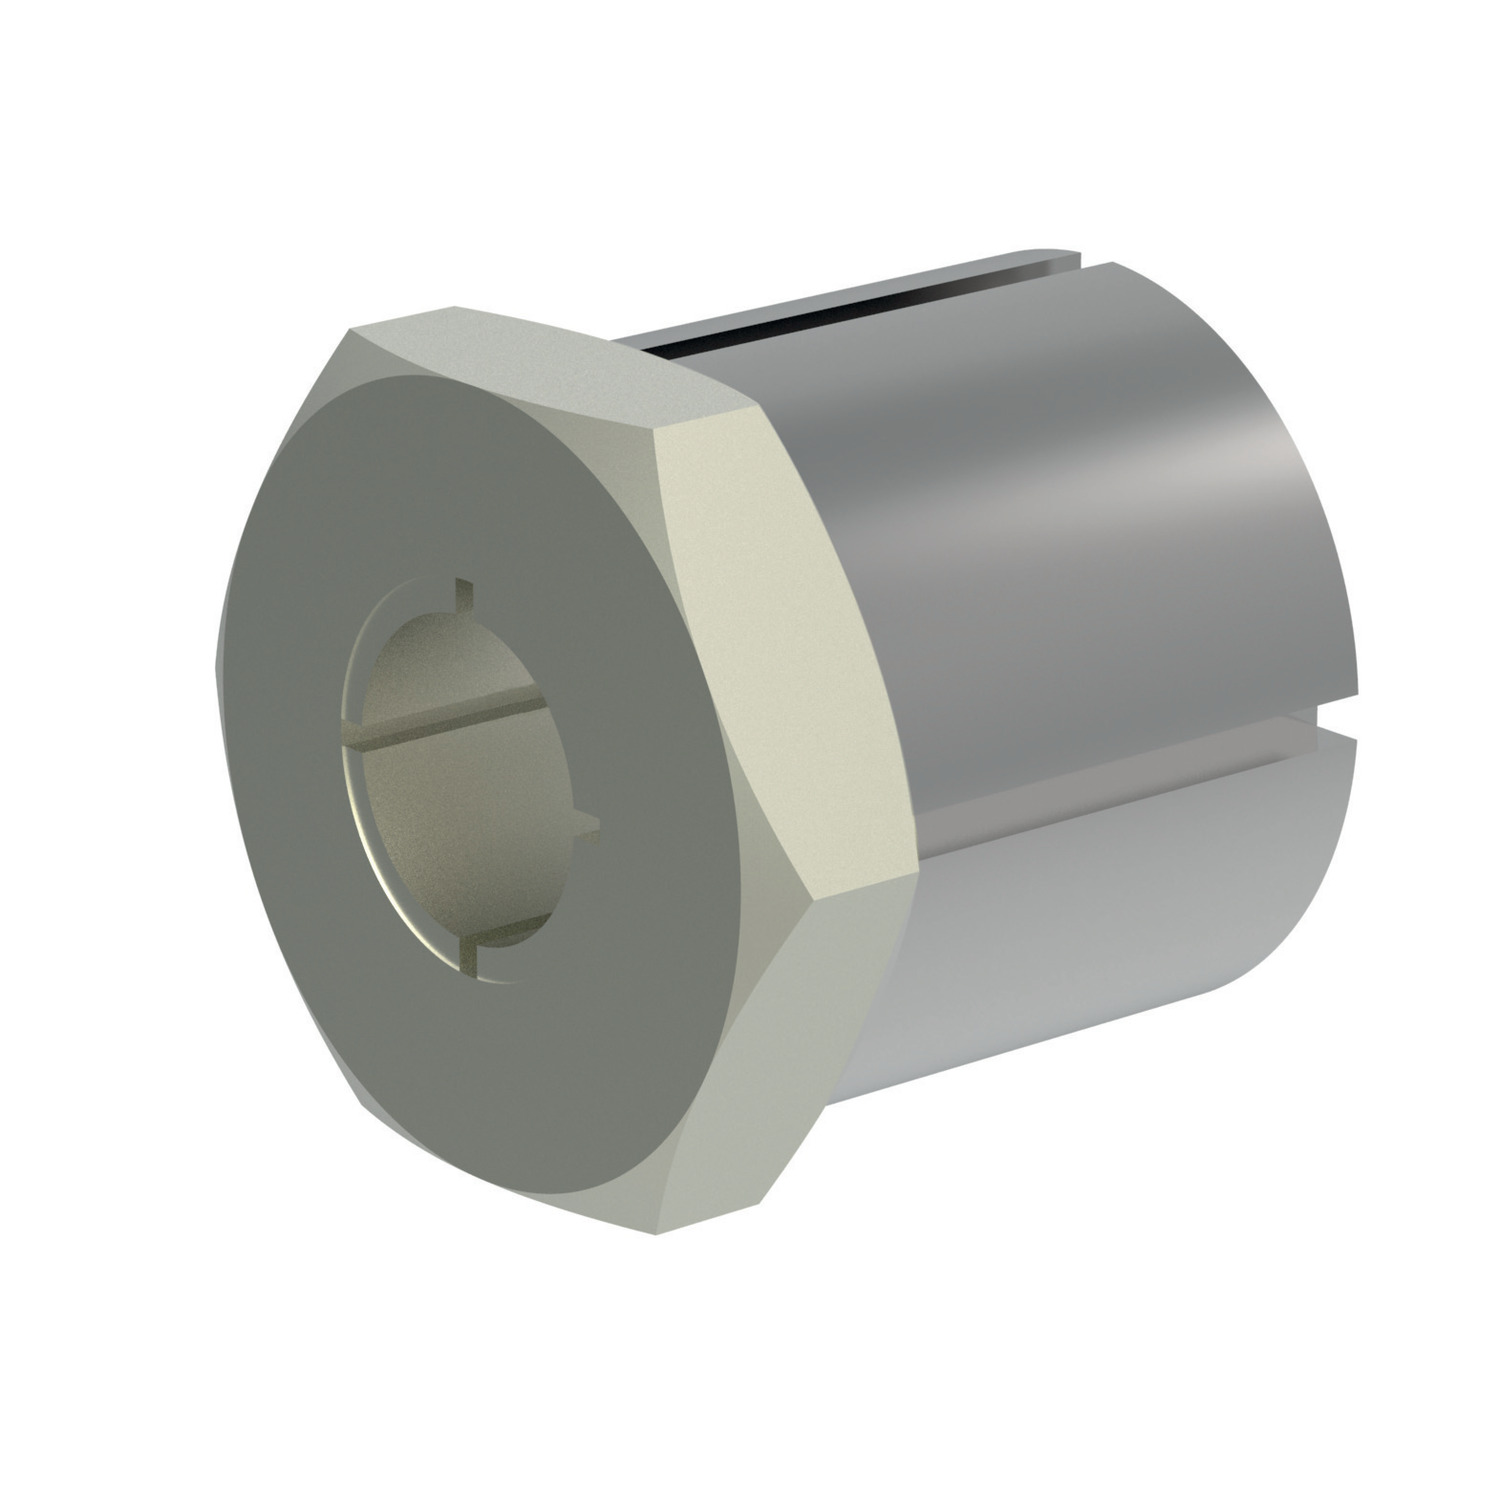 Product 38400, Tapered Shaft Hubs non-locking / 